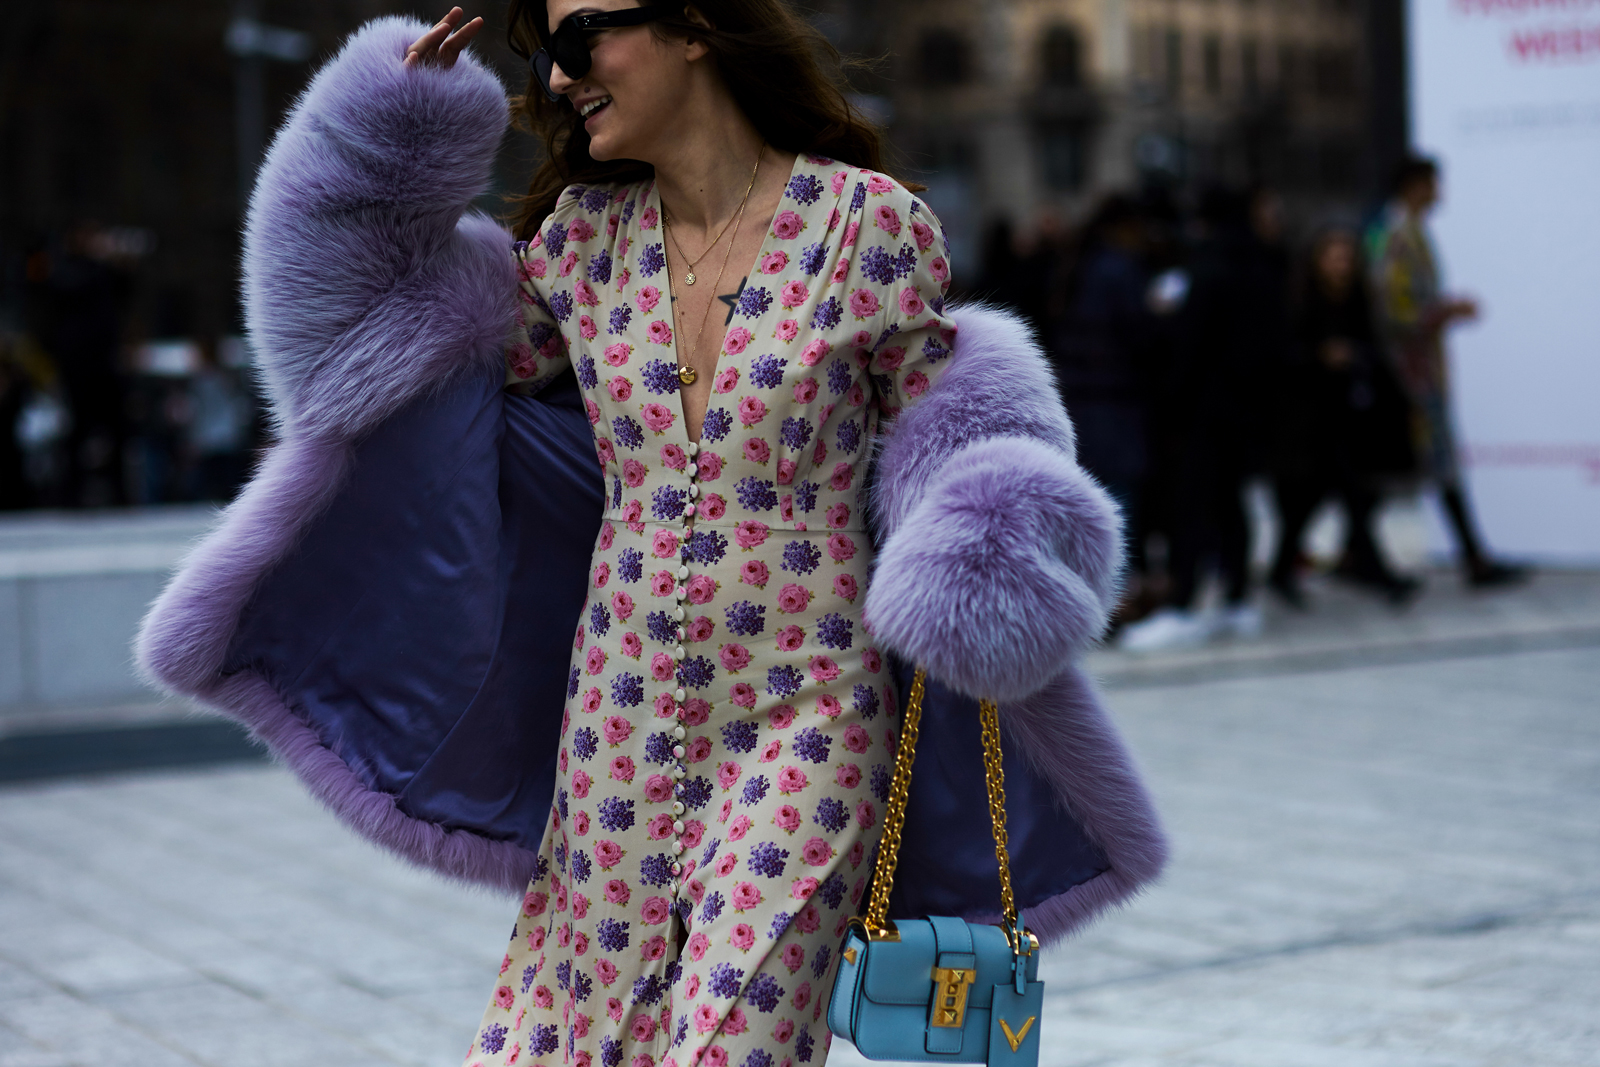 MFW Street Style: Italian blogger Eleonora Carisi wearing a long floral dress, fur coat, mules and Valentino Bag in Milan, Italy